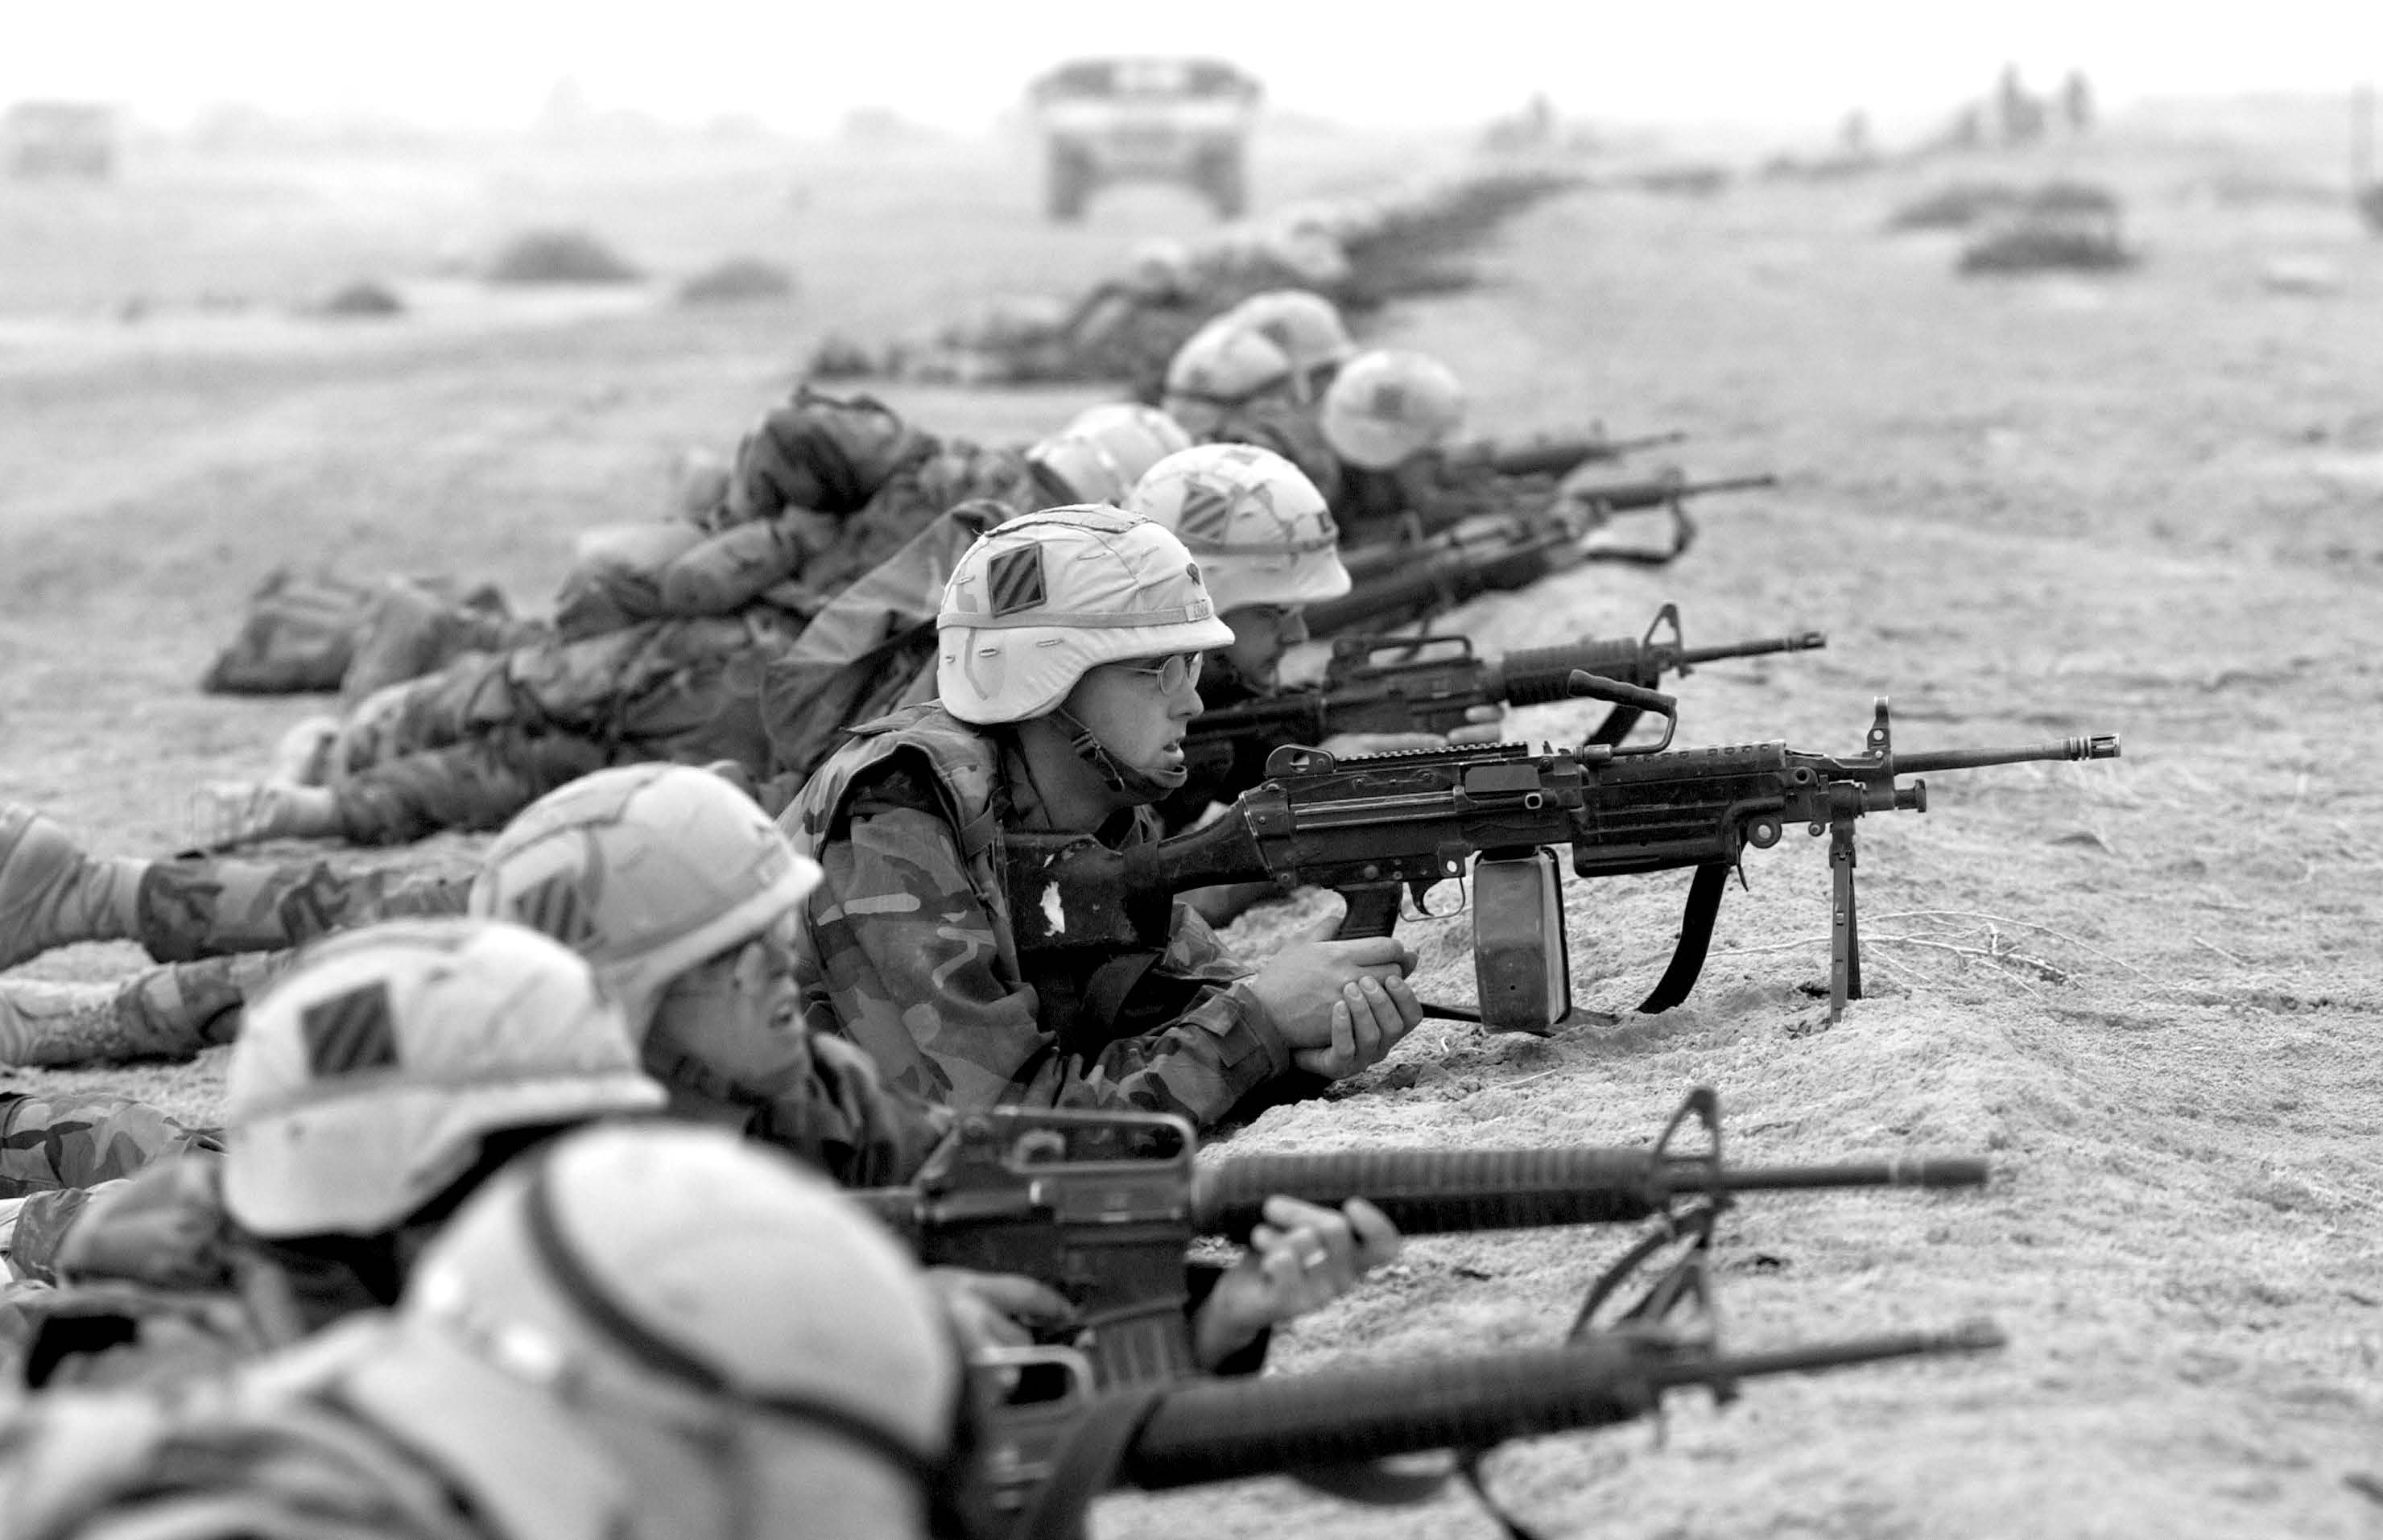 Soldiers from the 3rd Infantry Division in firing positions during an enemy approach on their position in southern Iraq on March 24, 2003. Courtesy of DoD.